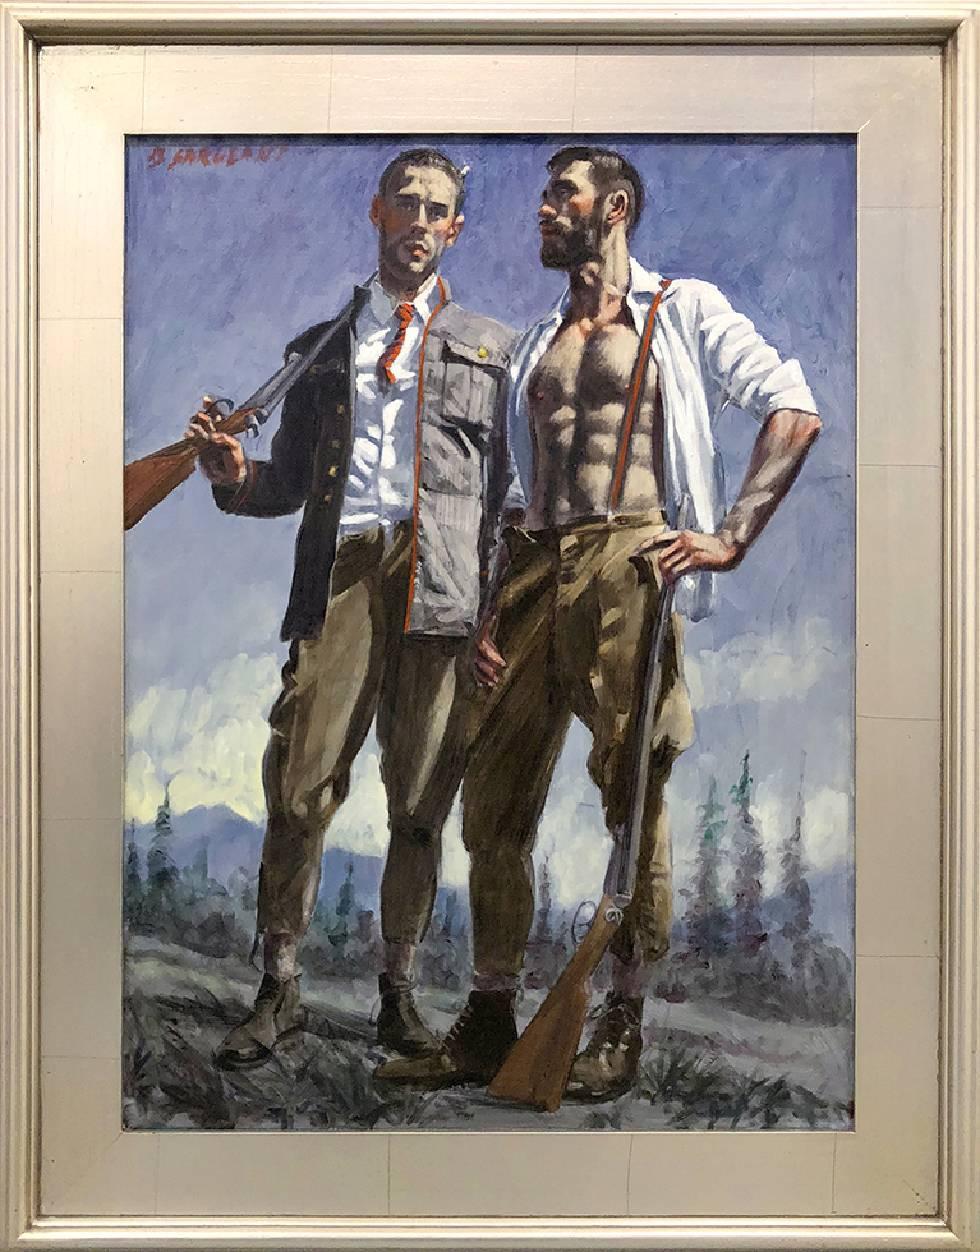 Mark Beard Figurative Painting - [Bruce Sargeant (1898-1938)] Two Hunters, One Wearing Suspenders